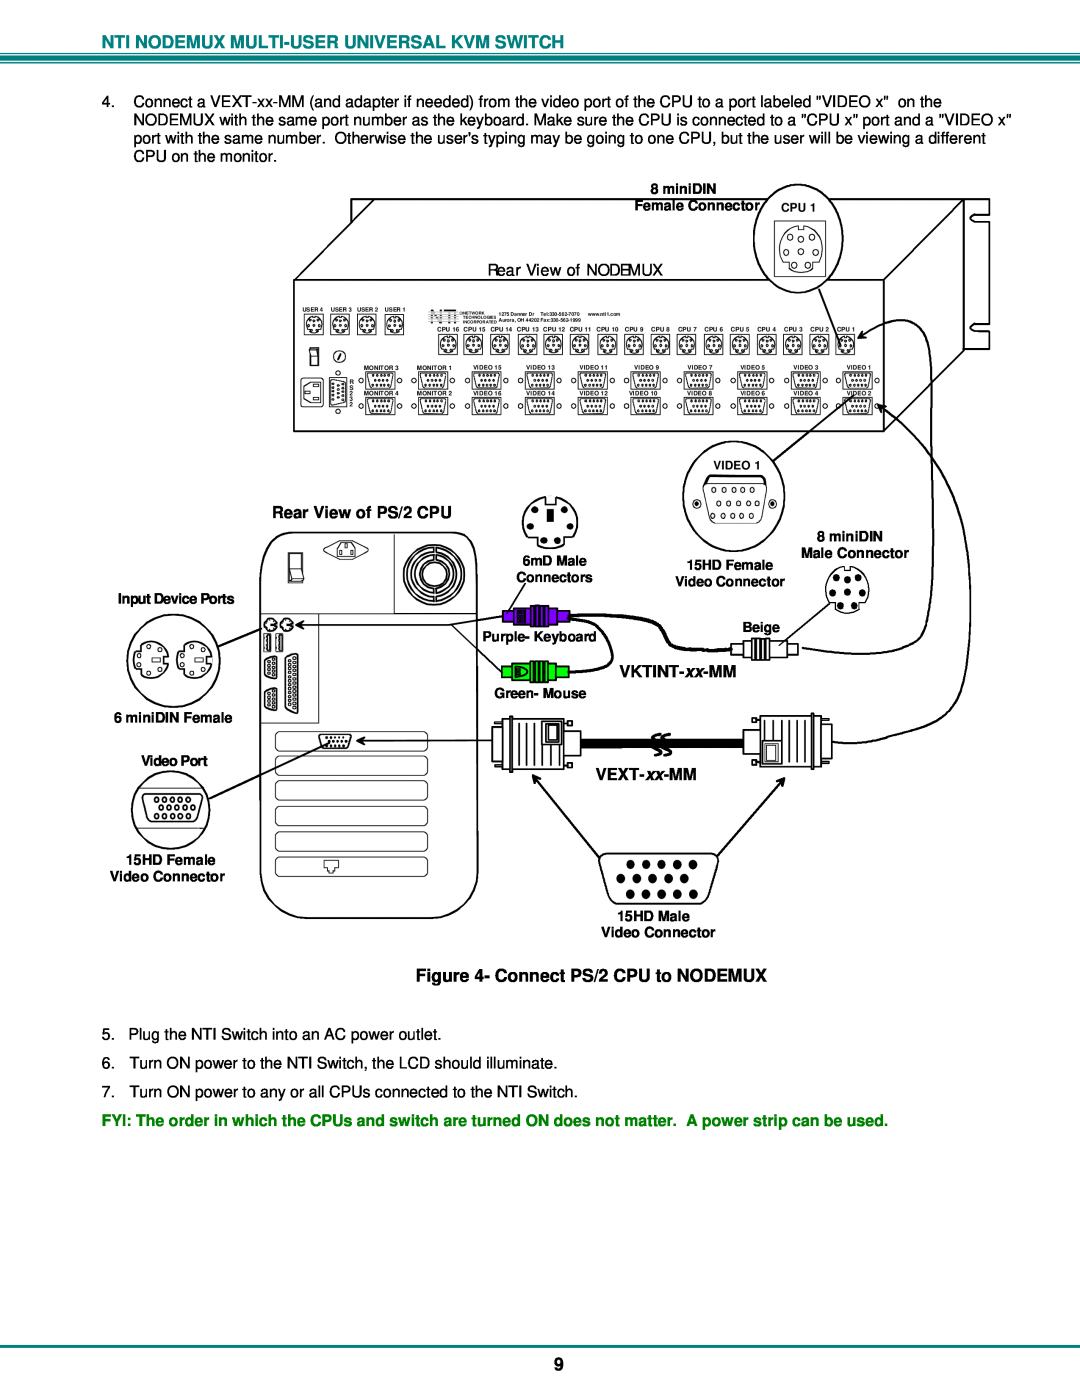 Network Technologies ST-nXm-U operation manual VKTINT-xx-MM, VEXT-xx-MM, Connect PS/2 CPU to NODEMUX, Rear View of PS/2 CPU 